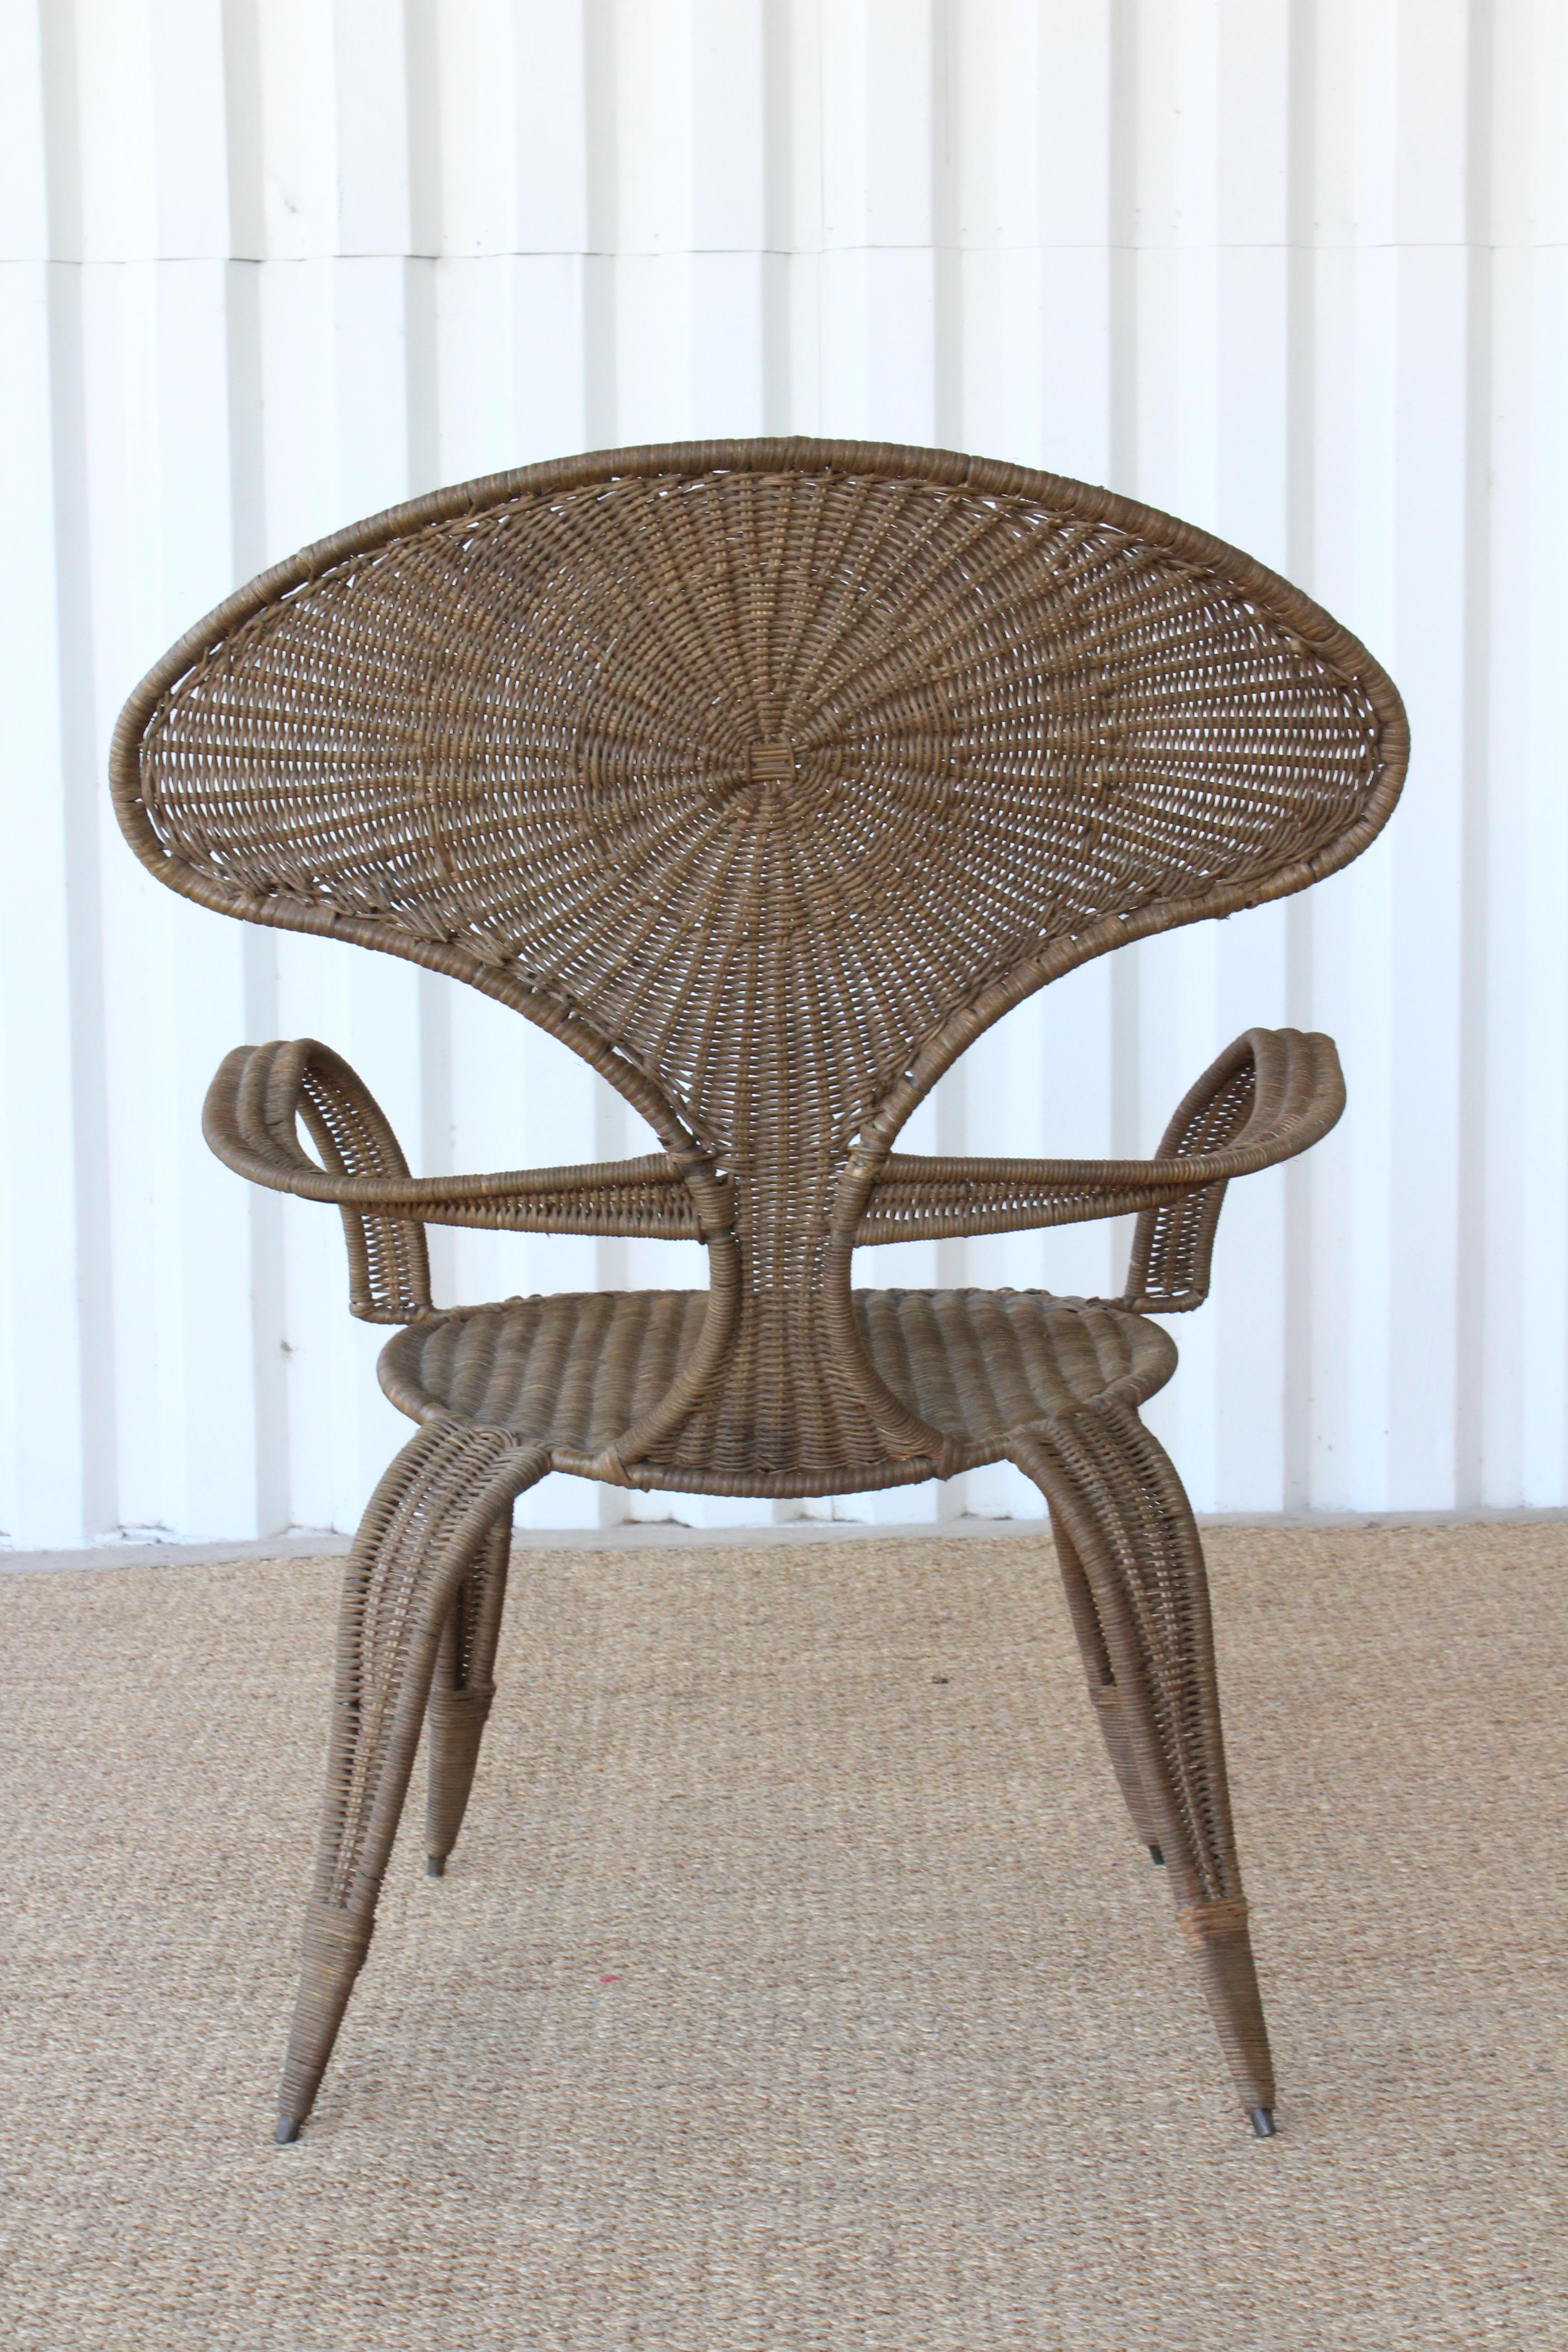 Hand-Woven Wicker and Iron Armchair by Danny Ho Fong, 1960s.